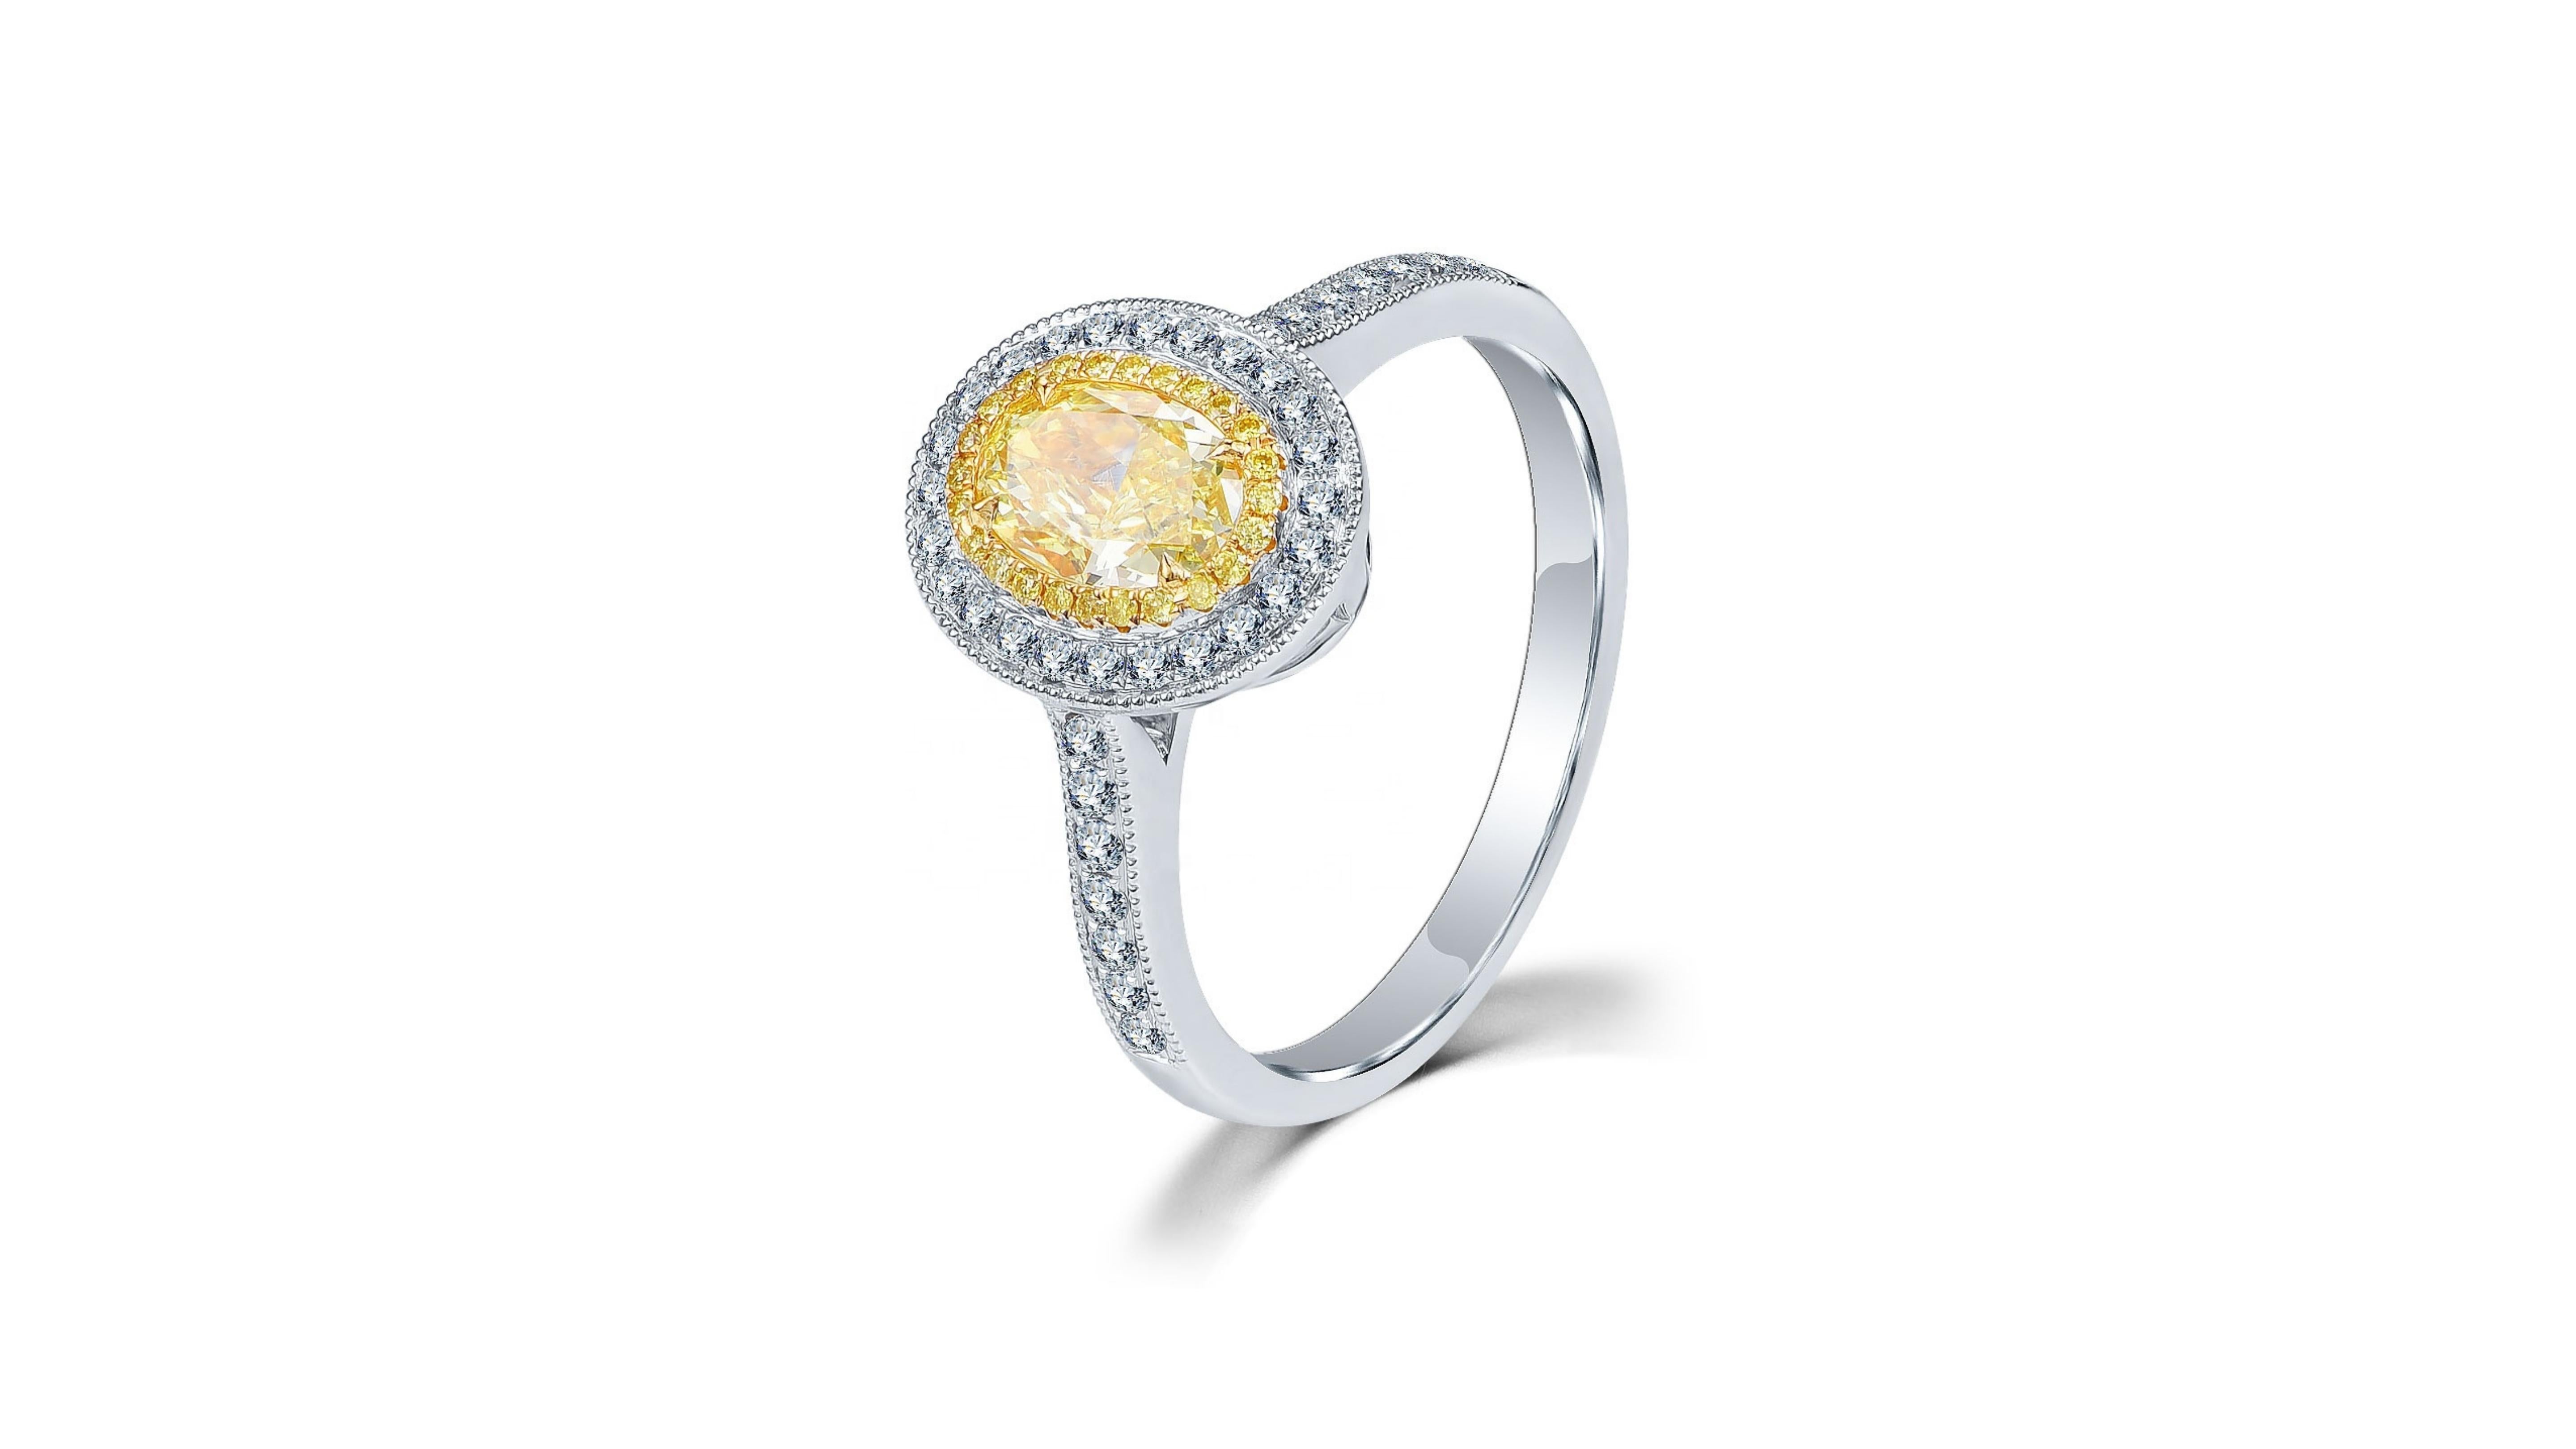 
This 1 Carat Fancy Yellow Diamond Ring Oval  cut with 46 white diamonds including  a set down each side of the band.  Its in 18 Karat White Gold
If you are looking for anything specific let us know as we can have any custom made. 

Do let us know